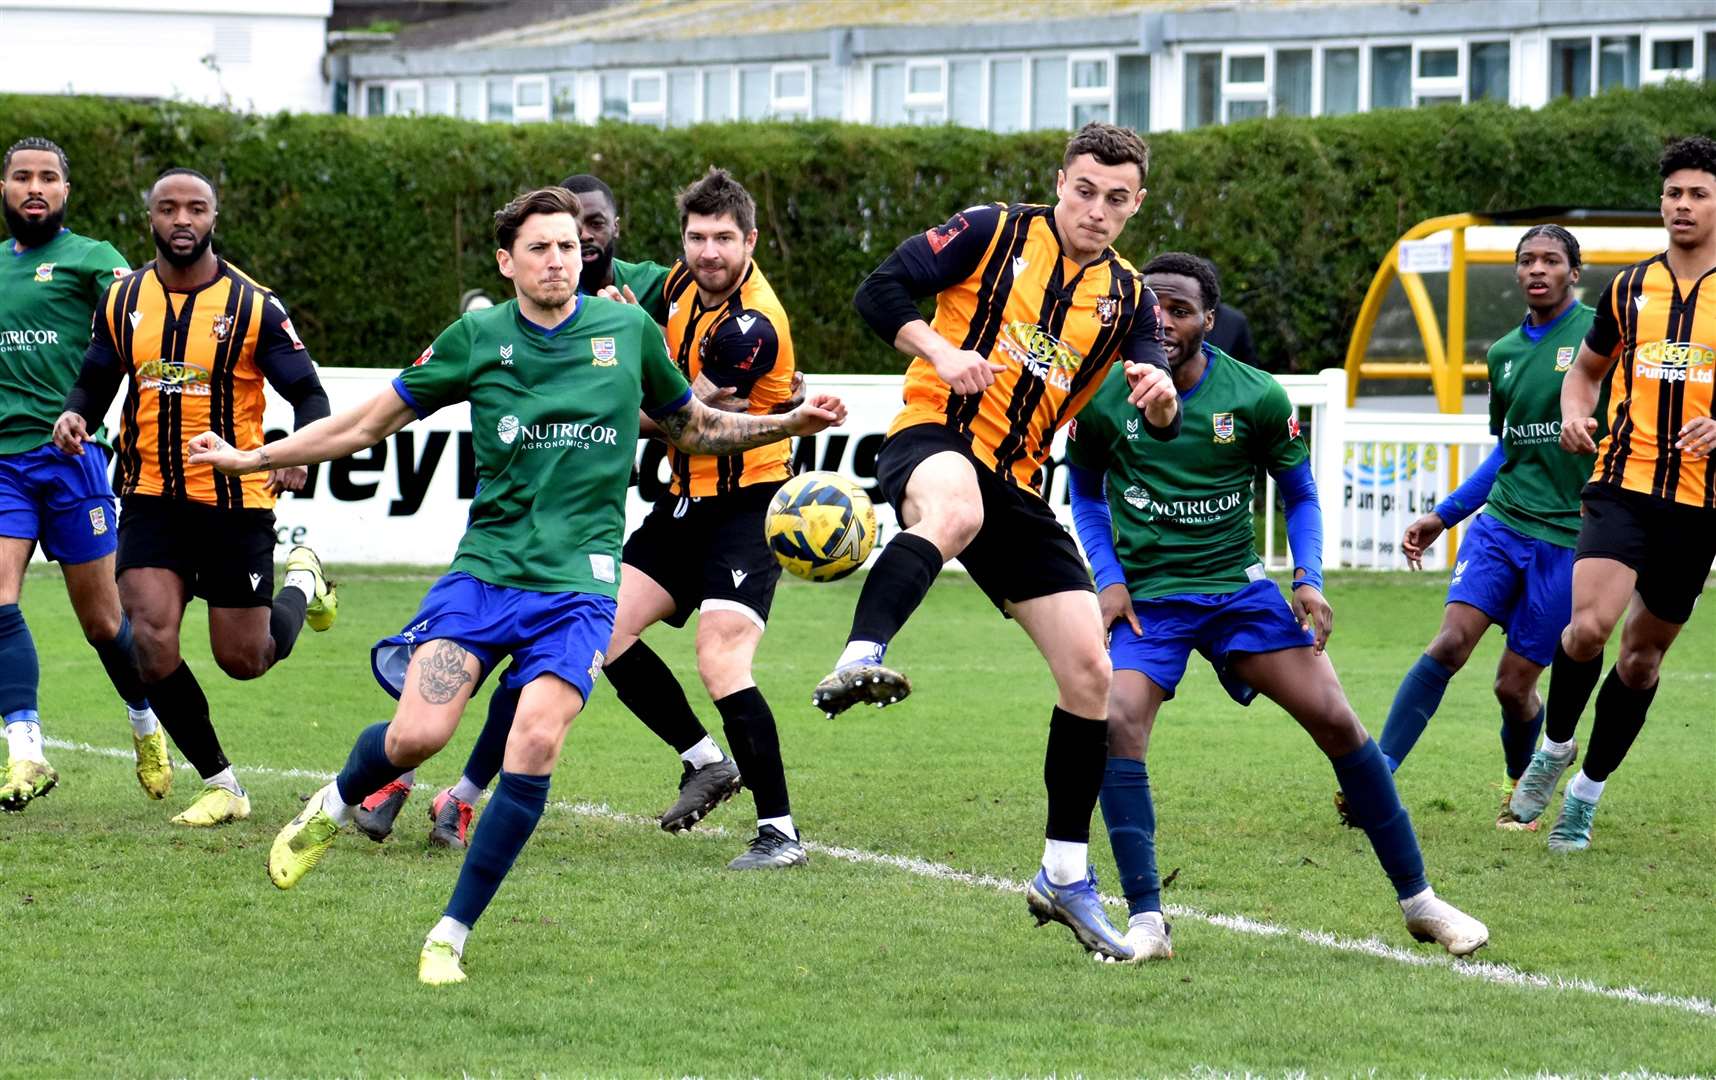 Action in the away penalty box at Cheriton Road. Picture: Randolph File